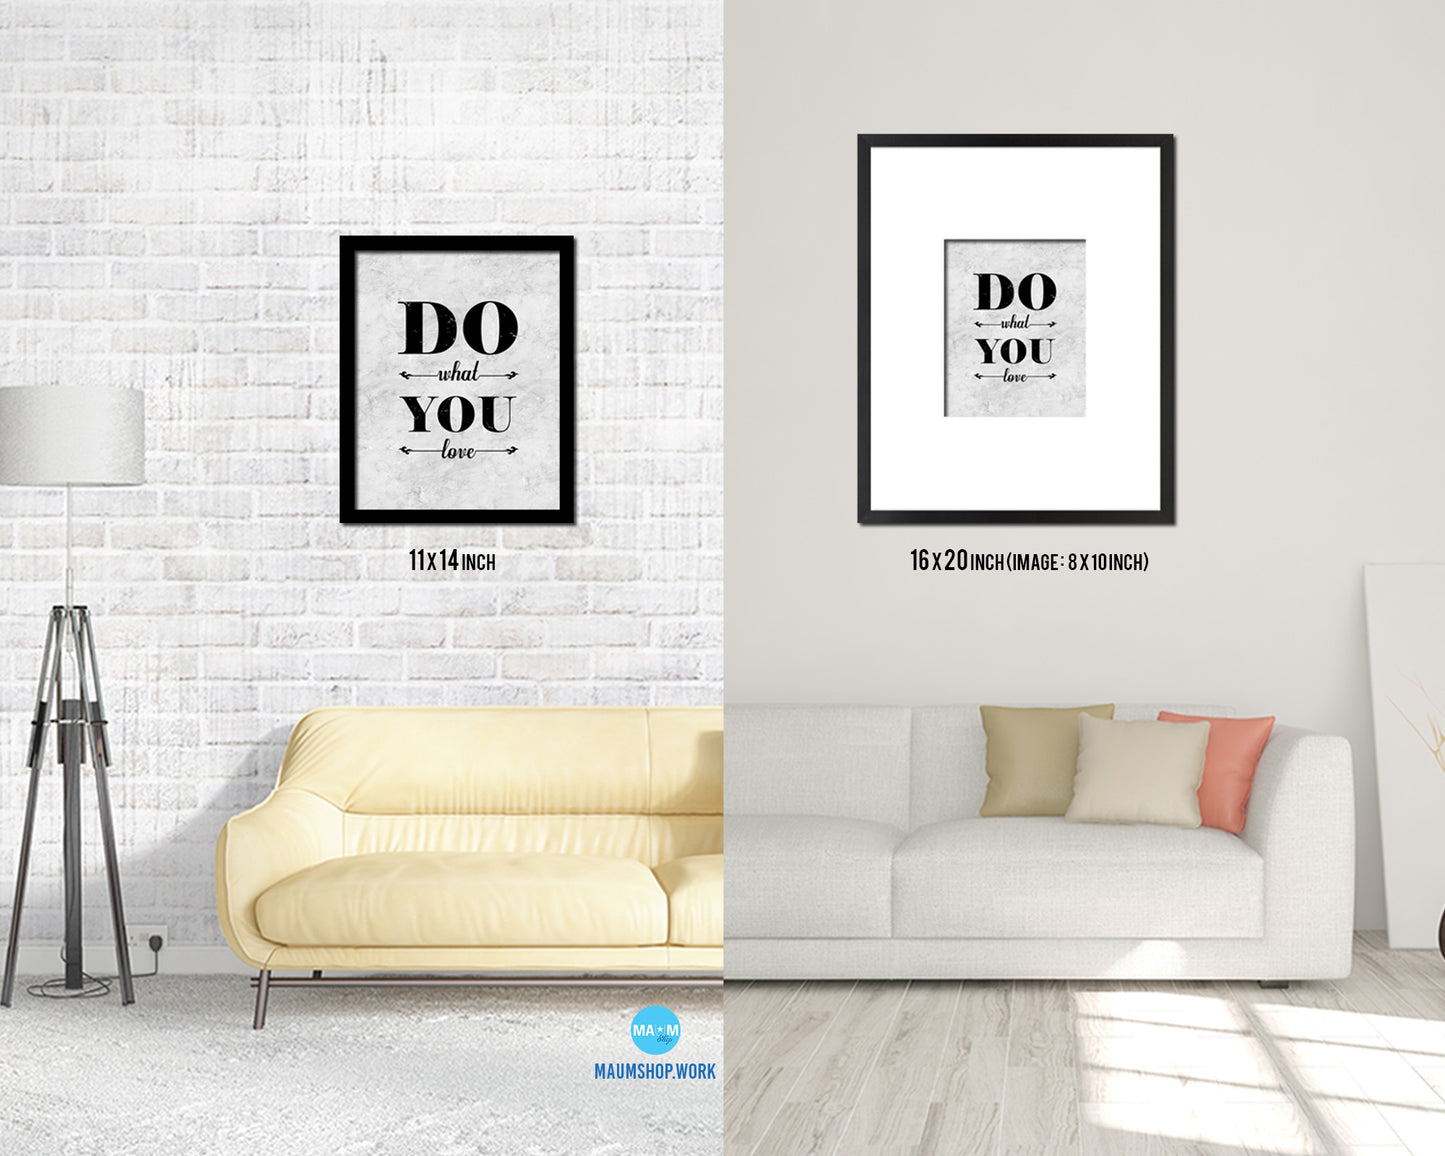 Do what you love Quote Framed Print Wall Art Decor Gifts